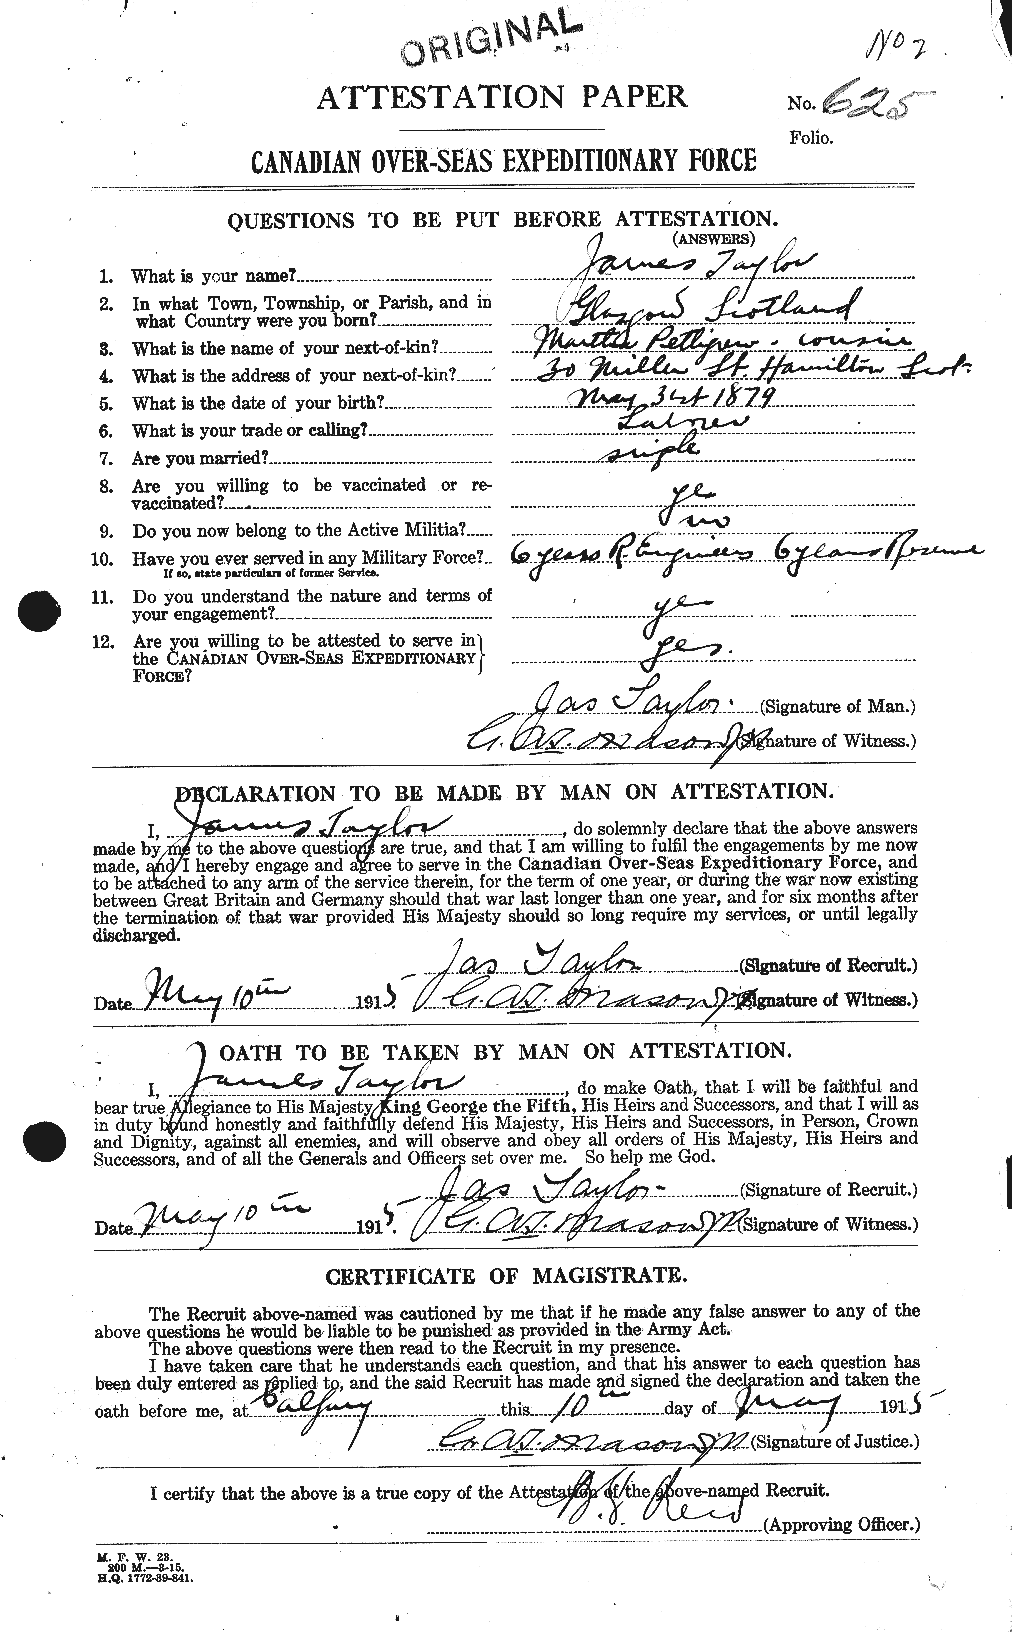 Personnel Records of the First World War - CEF 626681a